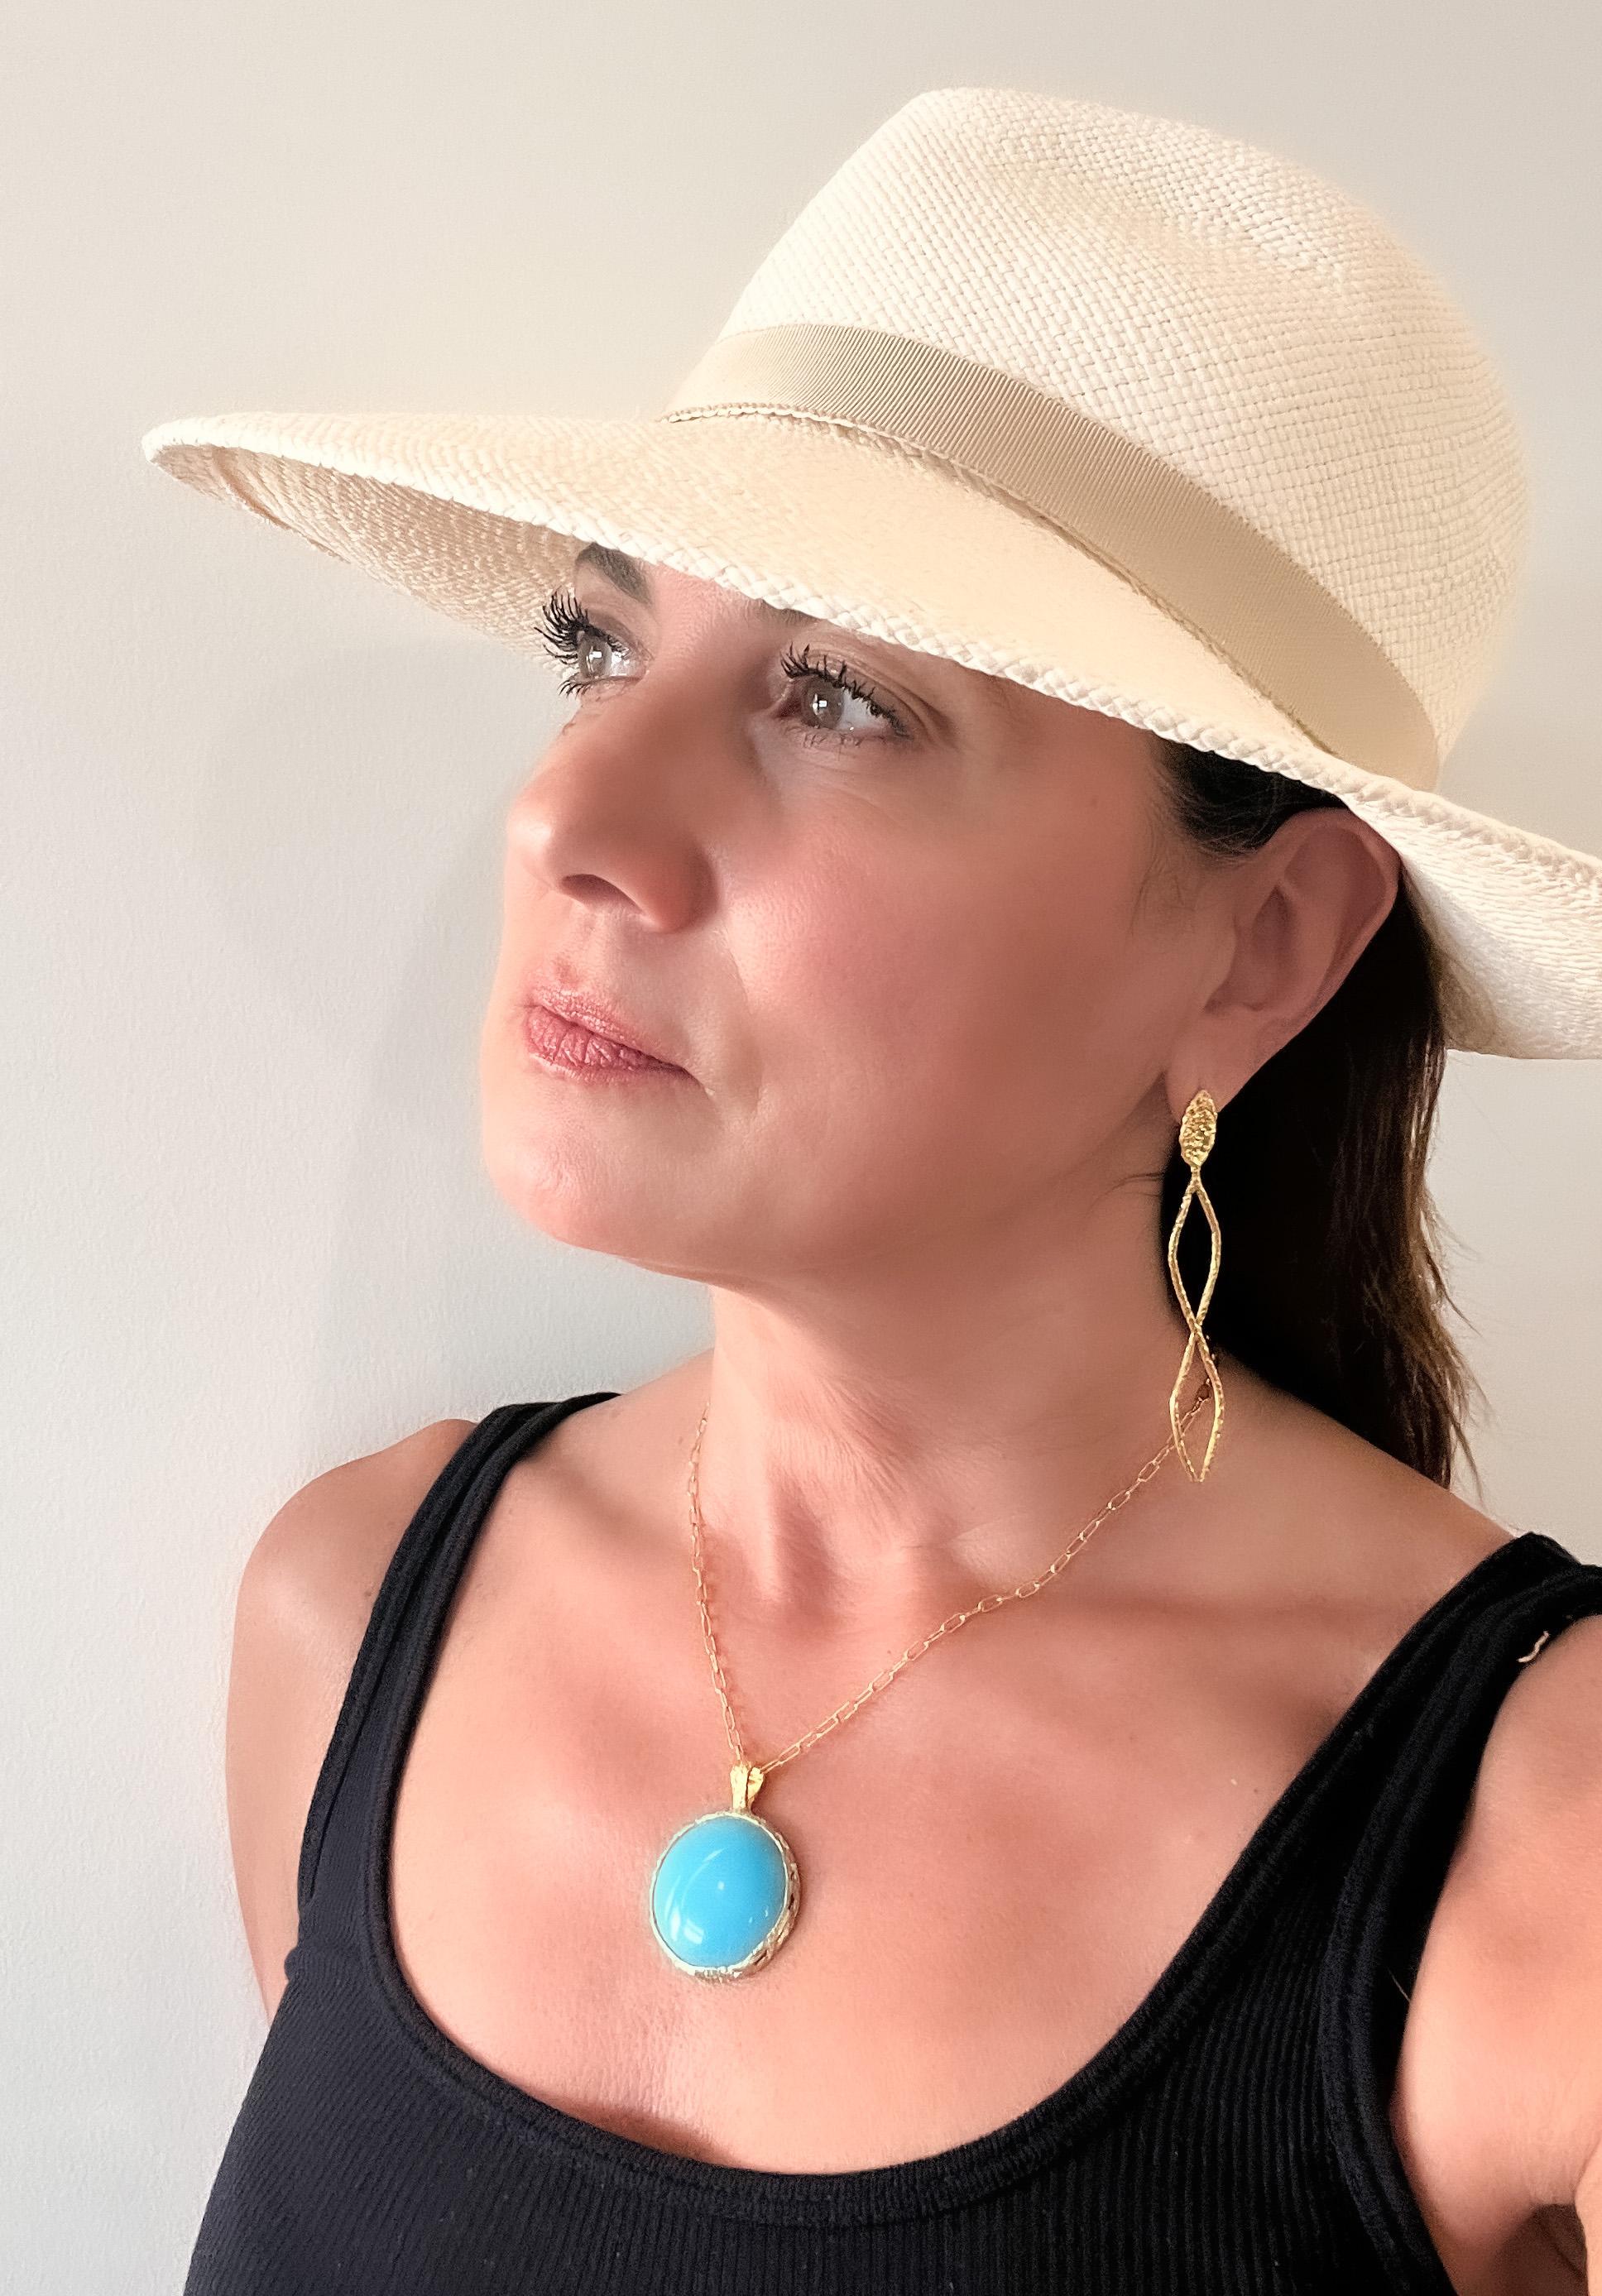 Turquoise Pendant set in 22k gold and is one of a kind and hand made! With the combination of Tagili’s signature finish and the vibrant color of turquoise blended together, effortlessly elevates your mood and style. Timeless, chic and spectacular.